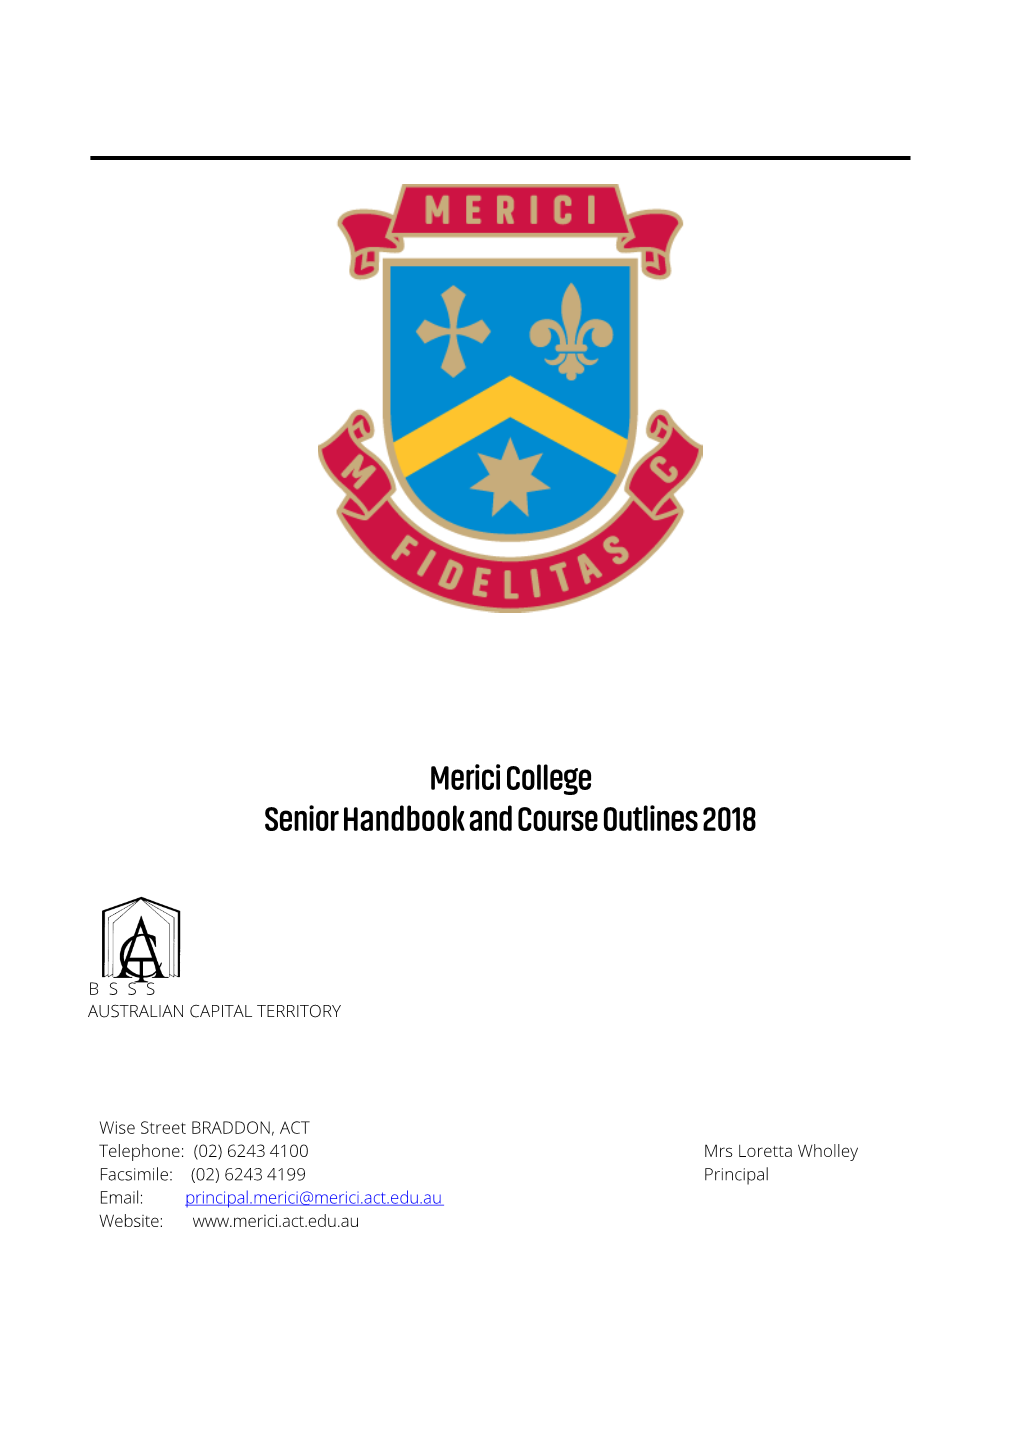 Merici College Senior Handbook and Course Outlines 2018